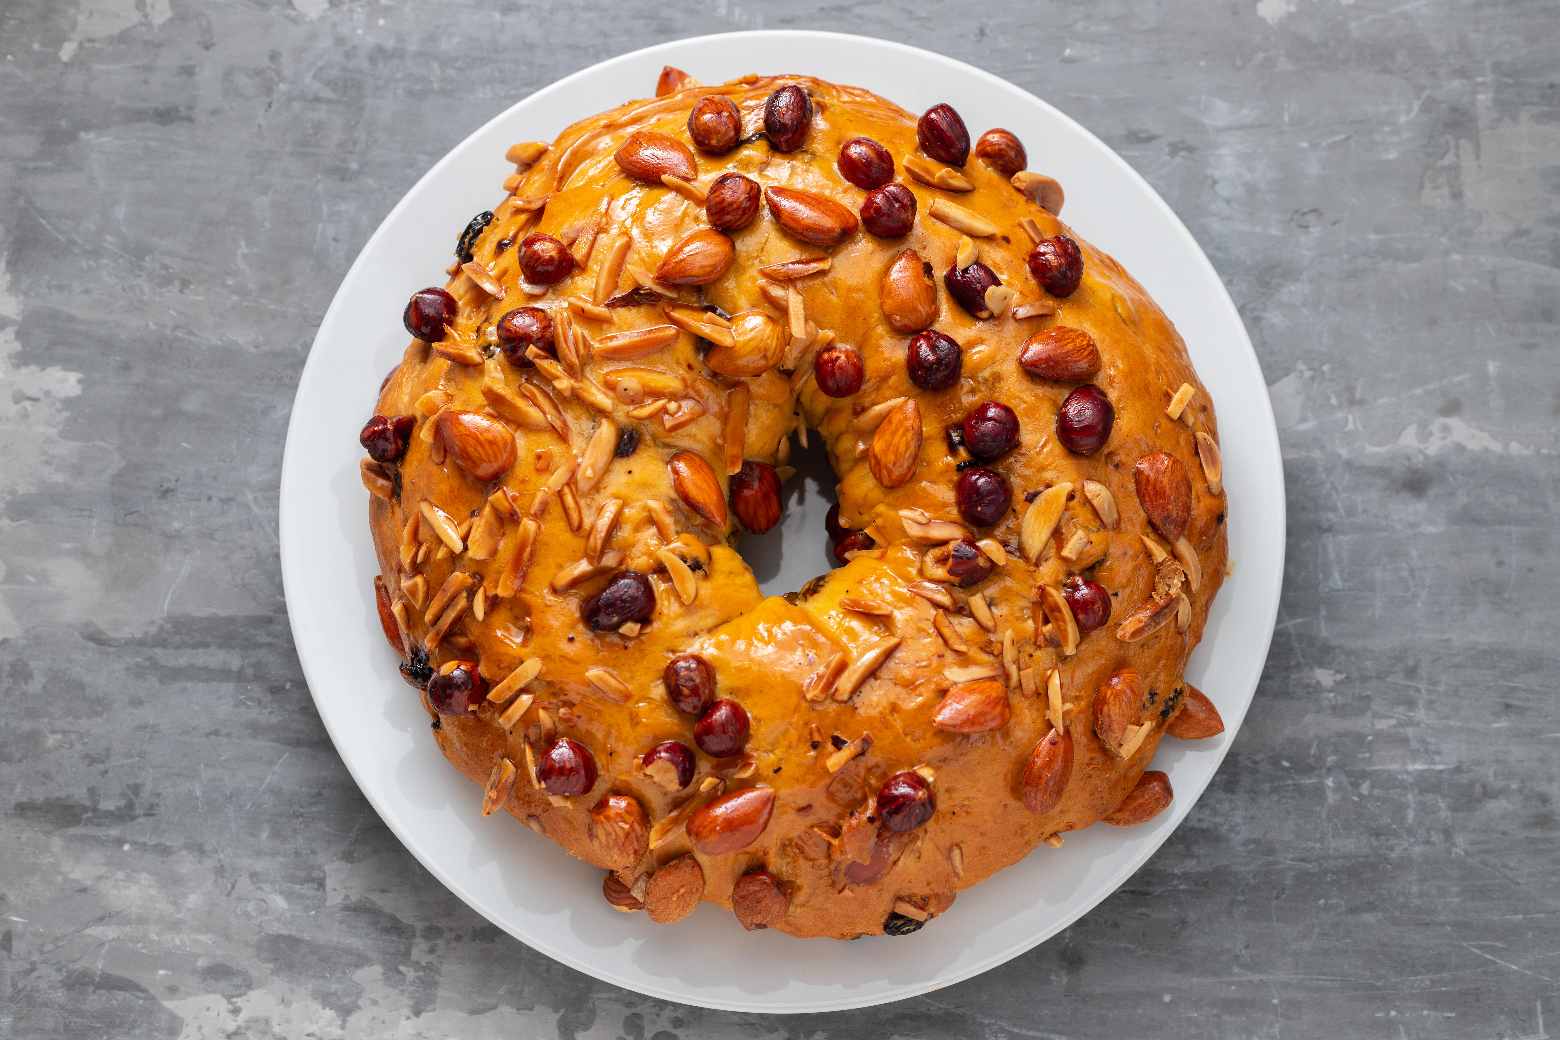 Bolo-rei, the king of cakes is Christmas on a plate